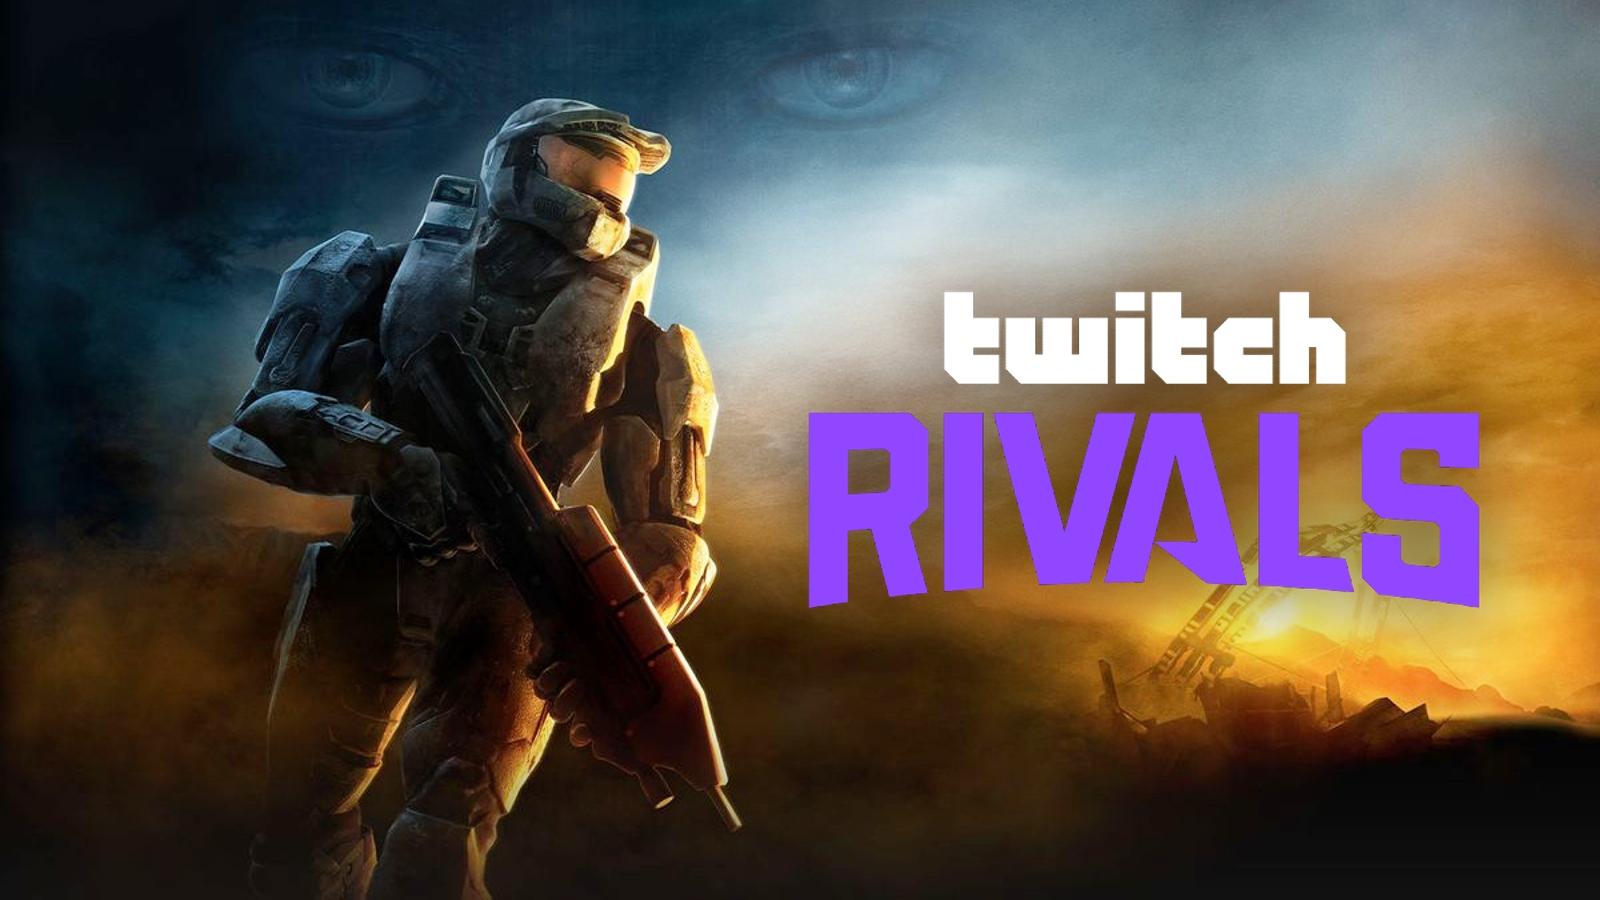 Halo 3 cover art with Twitch Rivals logo